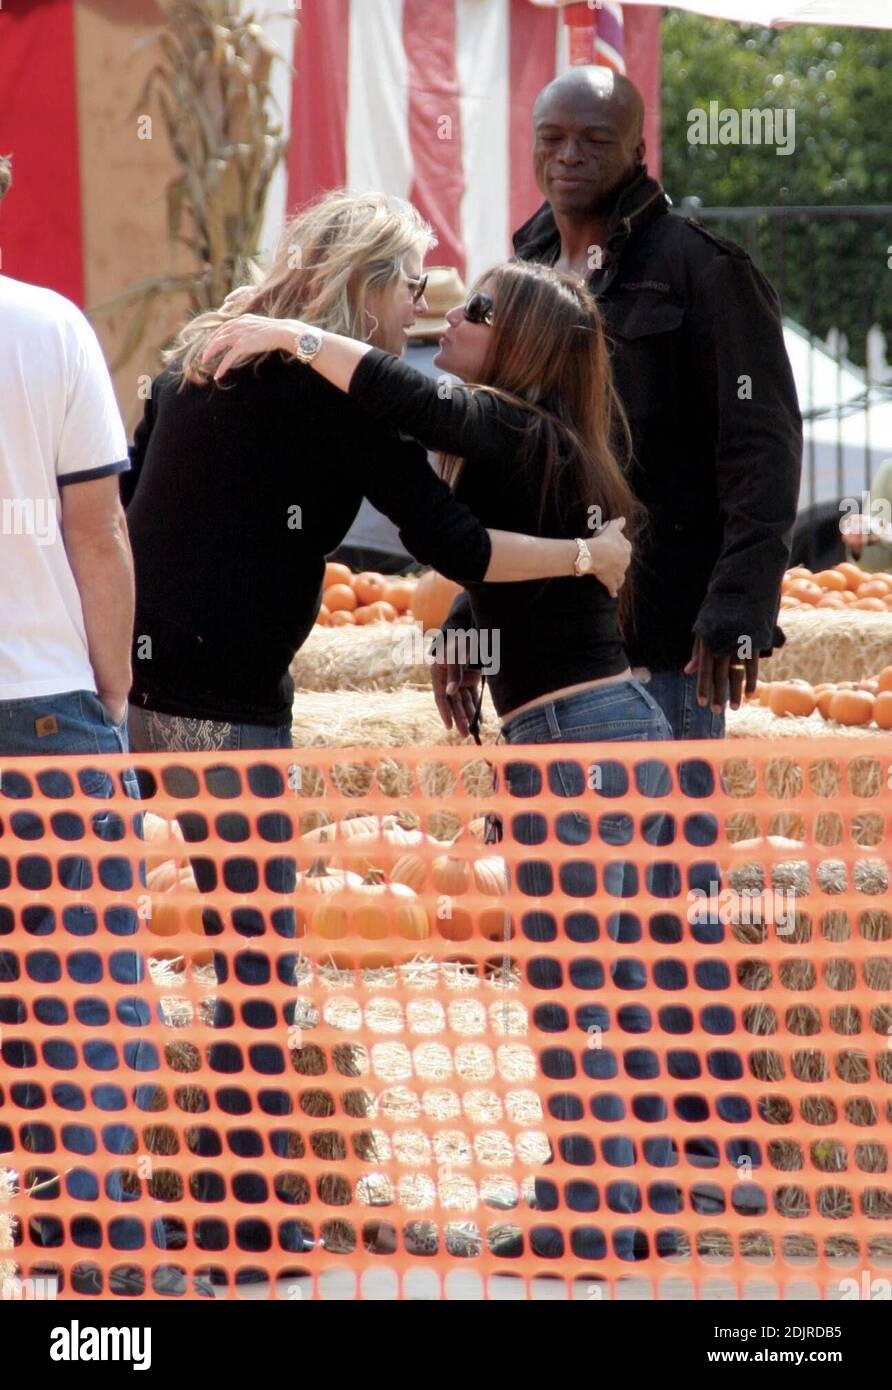 Heidi Klum and Seal take their growing brood to the Pumpkin Patch in West Hollywood, Ca. The children played with skeletons and ran around in a  bouncy pumpkin.  They even took a ride on ponies but the pair refused to get their faces painted. The family spent two hours in the Halloween hotspot before selecting a few pumpkins and heading home. 10/14/06 Stock Photo